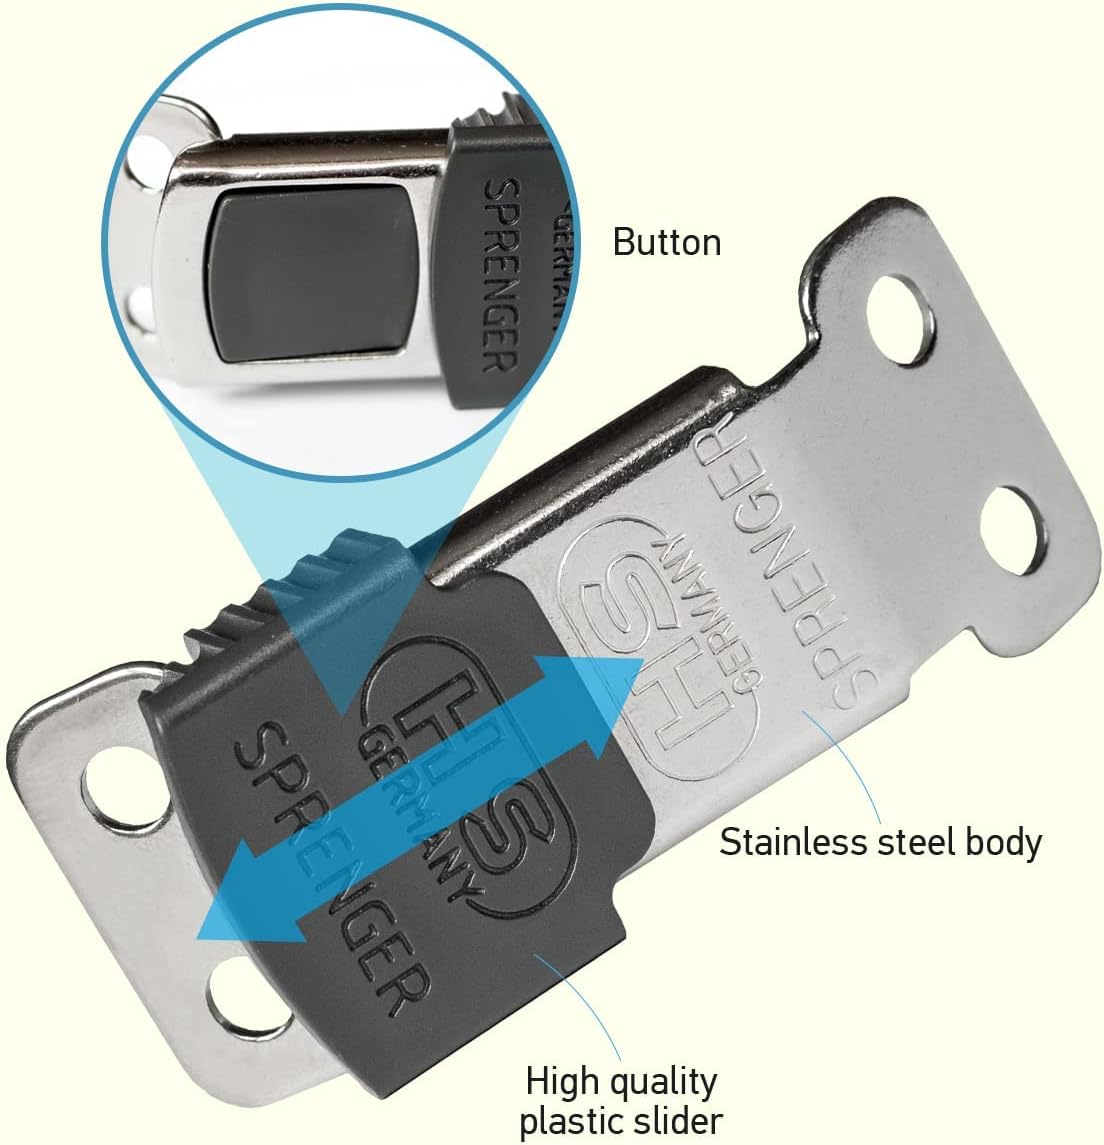 Herm Sprenger ClicLock Fastener Stainless Steel Buckle for Prong Dog Training Collar  Quick Release with Easy Buckle for Medium Large Dogs (3.0/3.2mm)